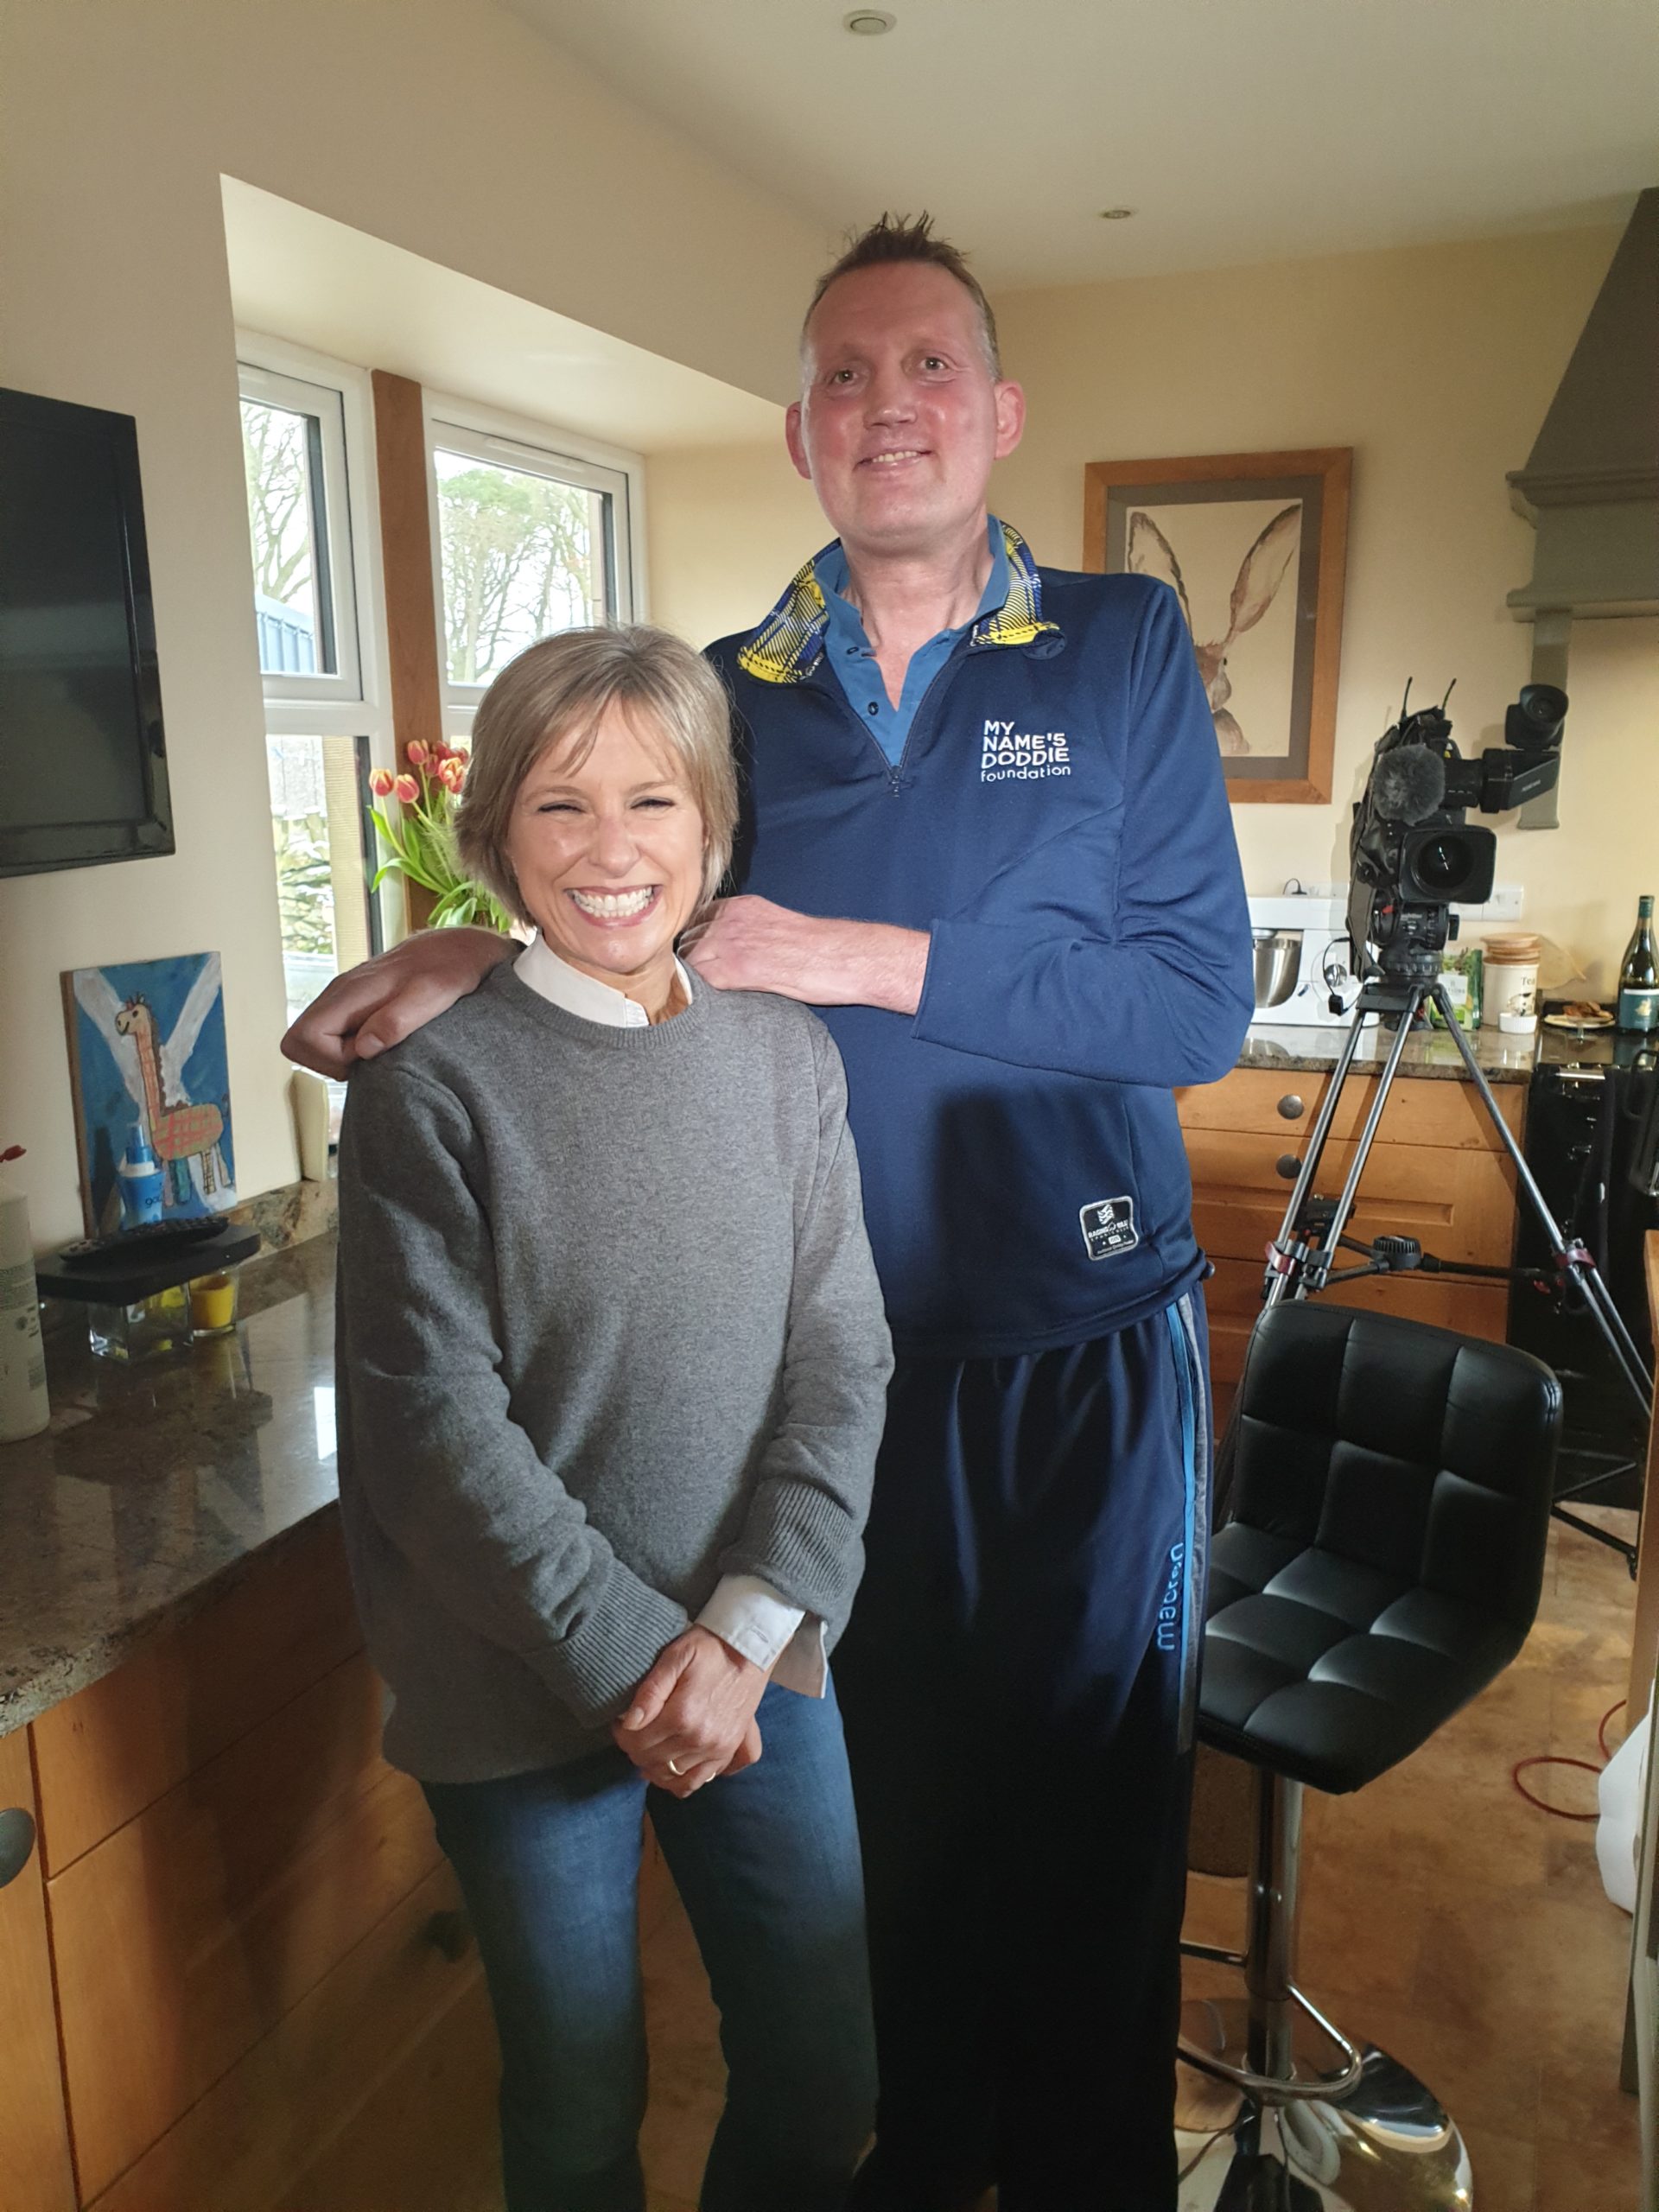 Scotland Tonight: The interview with Rona Dougall will air on Thursday night.